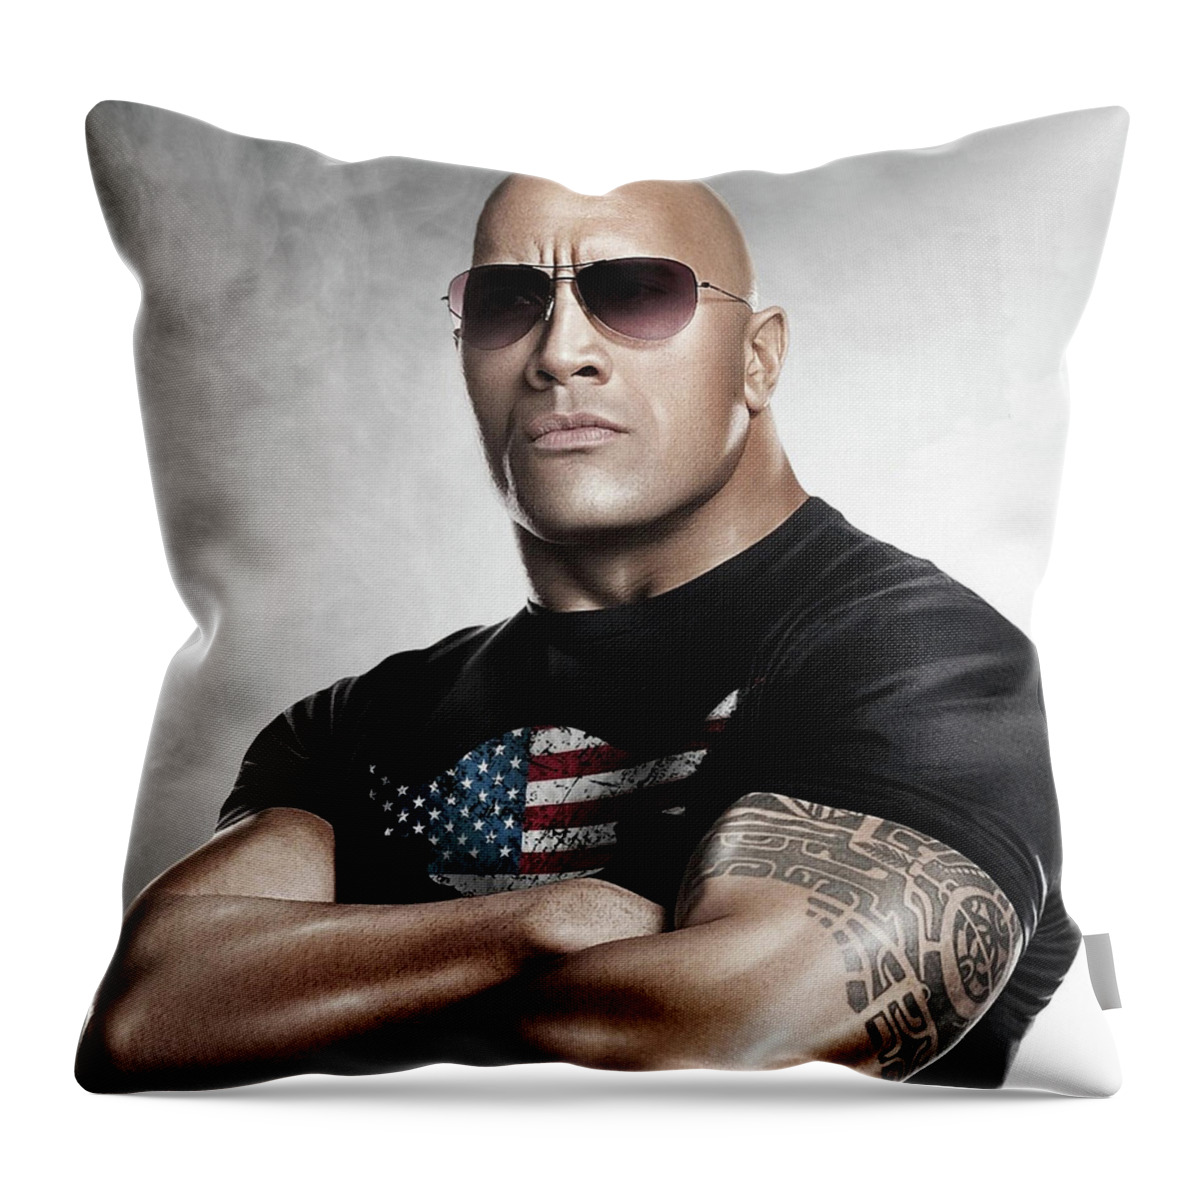 The Rock Throw Pillow featuring the photograph The Rock Dwayne Johnson I I by Movie Poster Prints